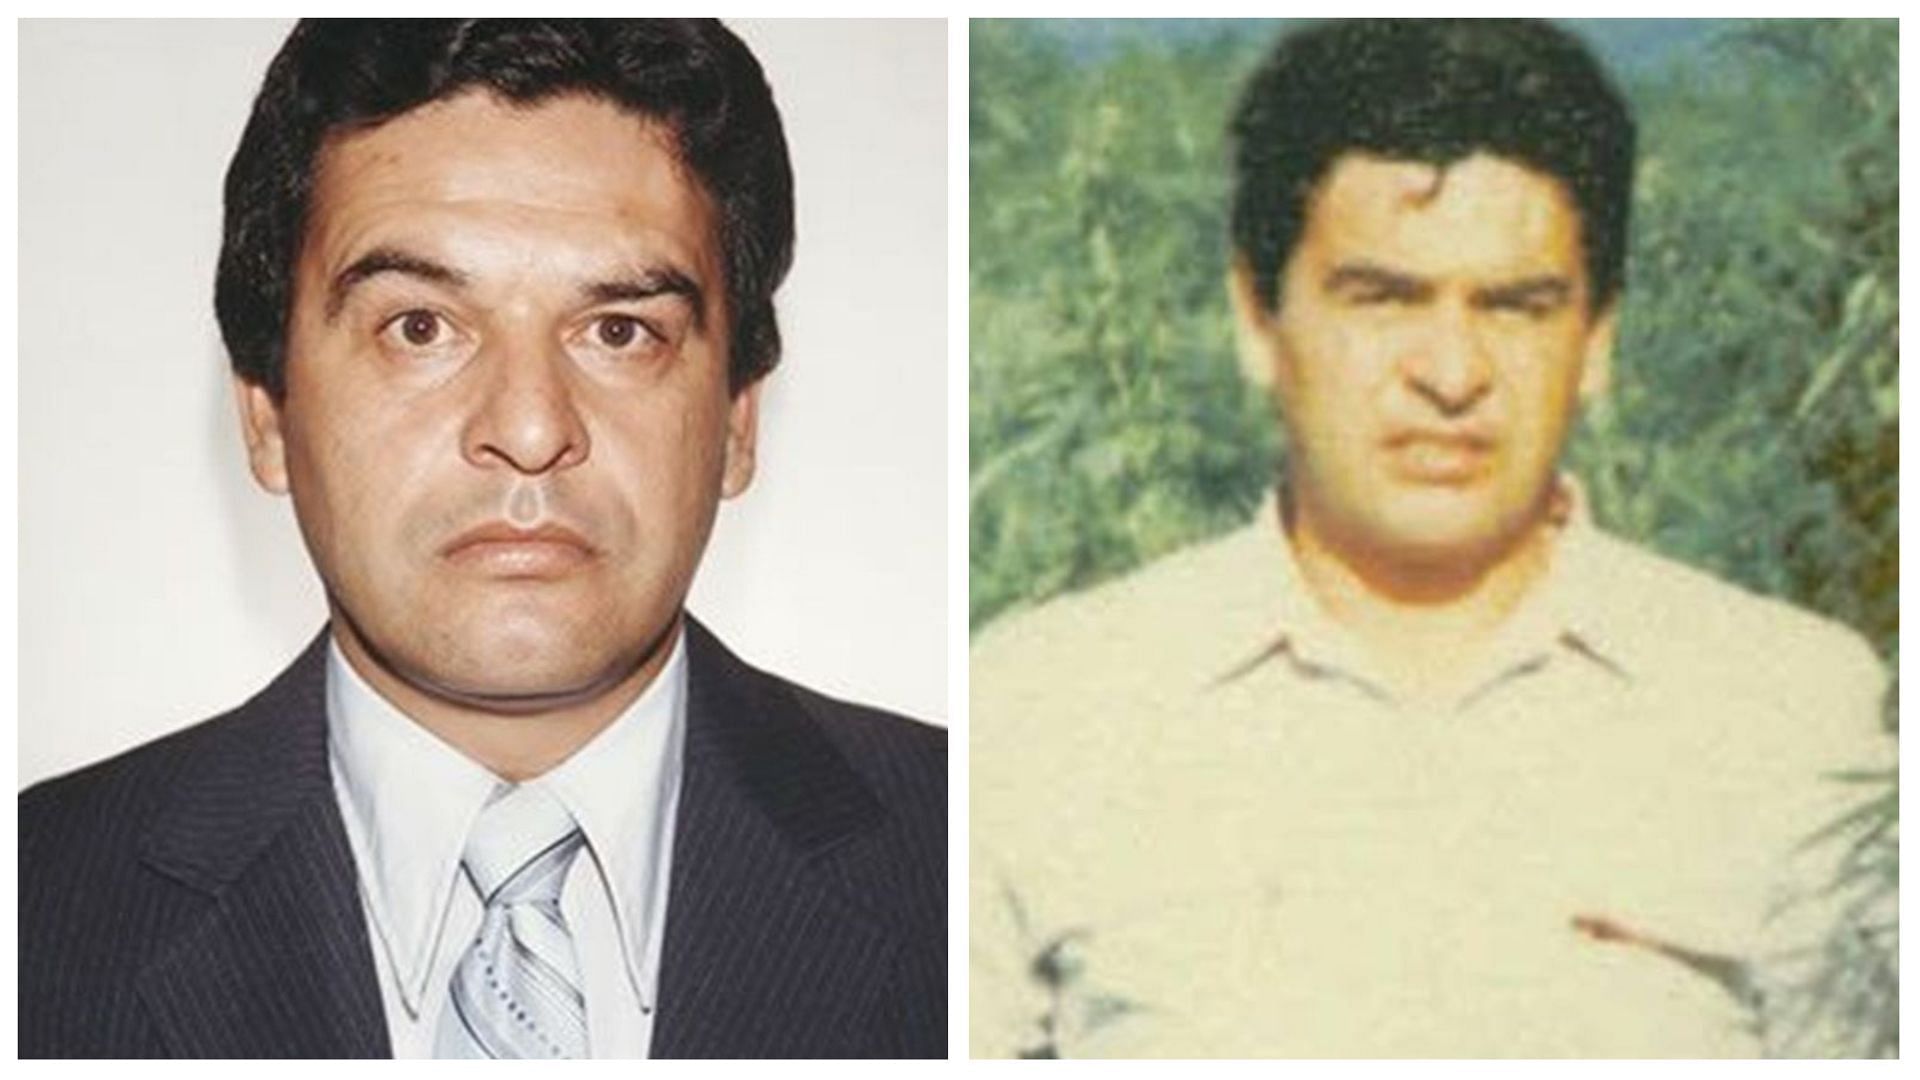 Kiki Camarena was abducted and tortured by cartel members in 1985 (images via FBI)